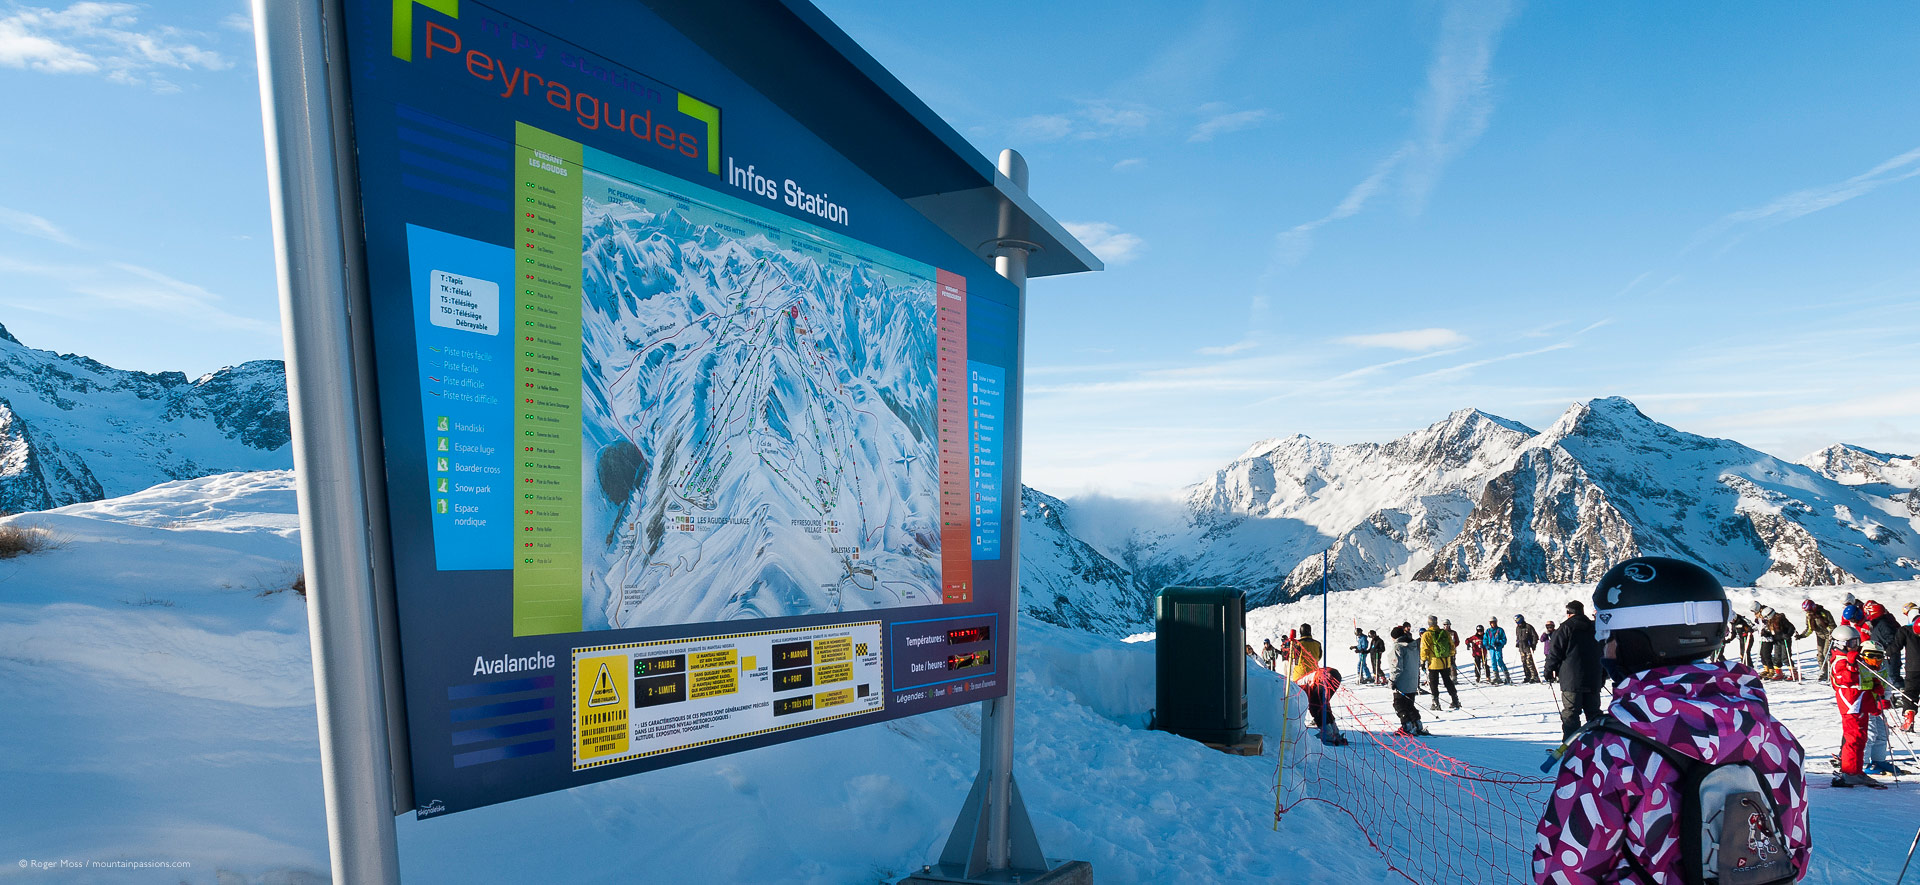 Young skier beside piste map sign.